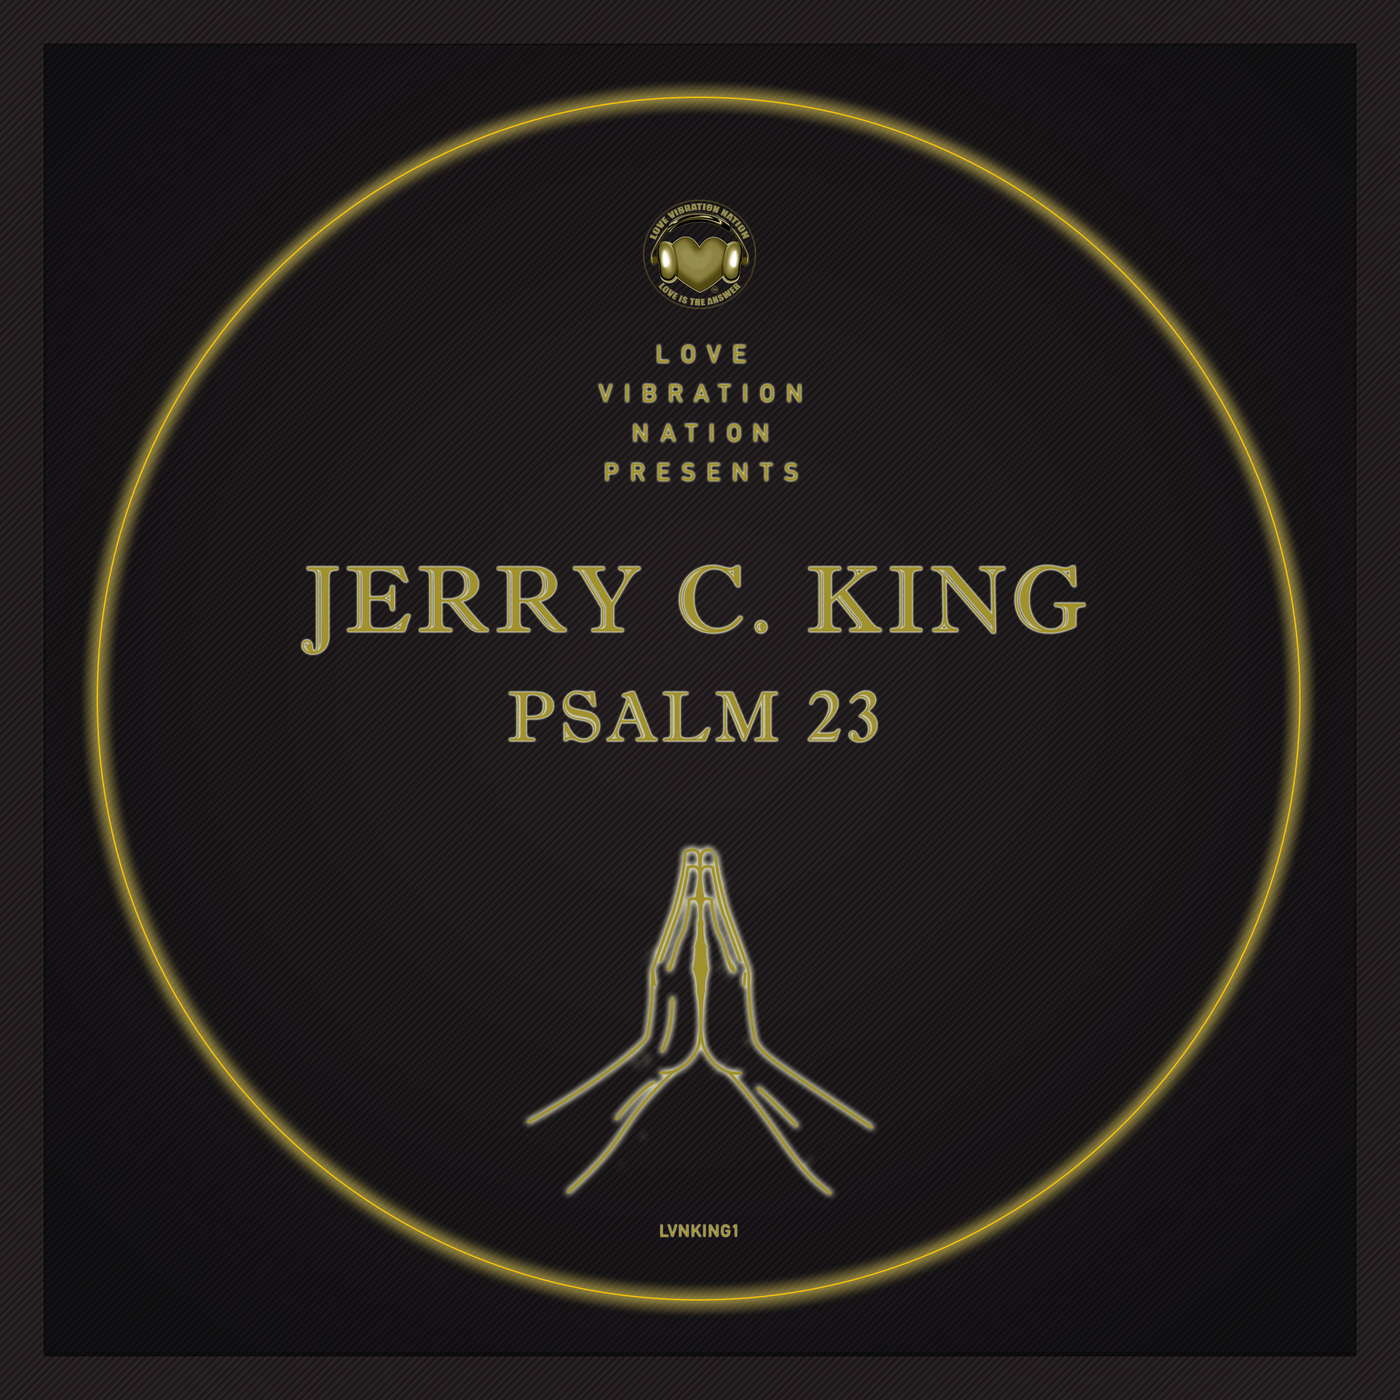 Jerry C. King - Psalm 23 Gold Edition / Love Vibration Nation Music